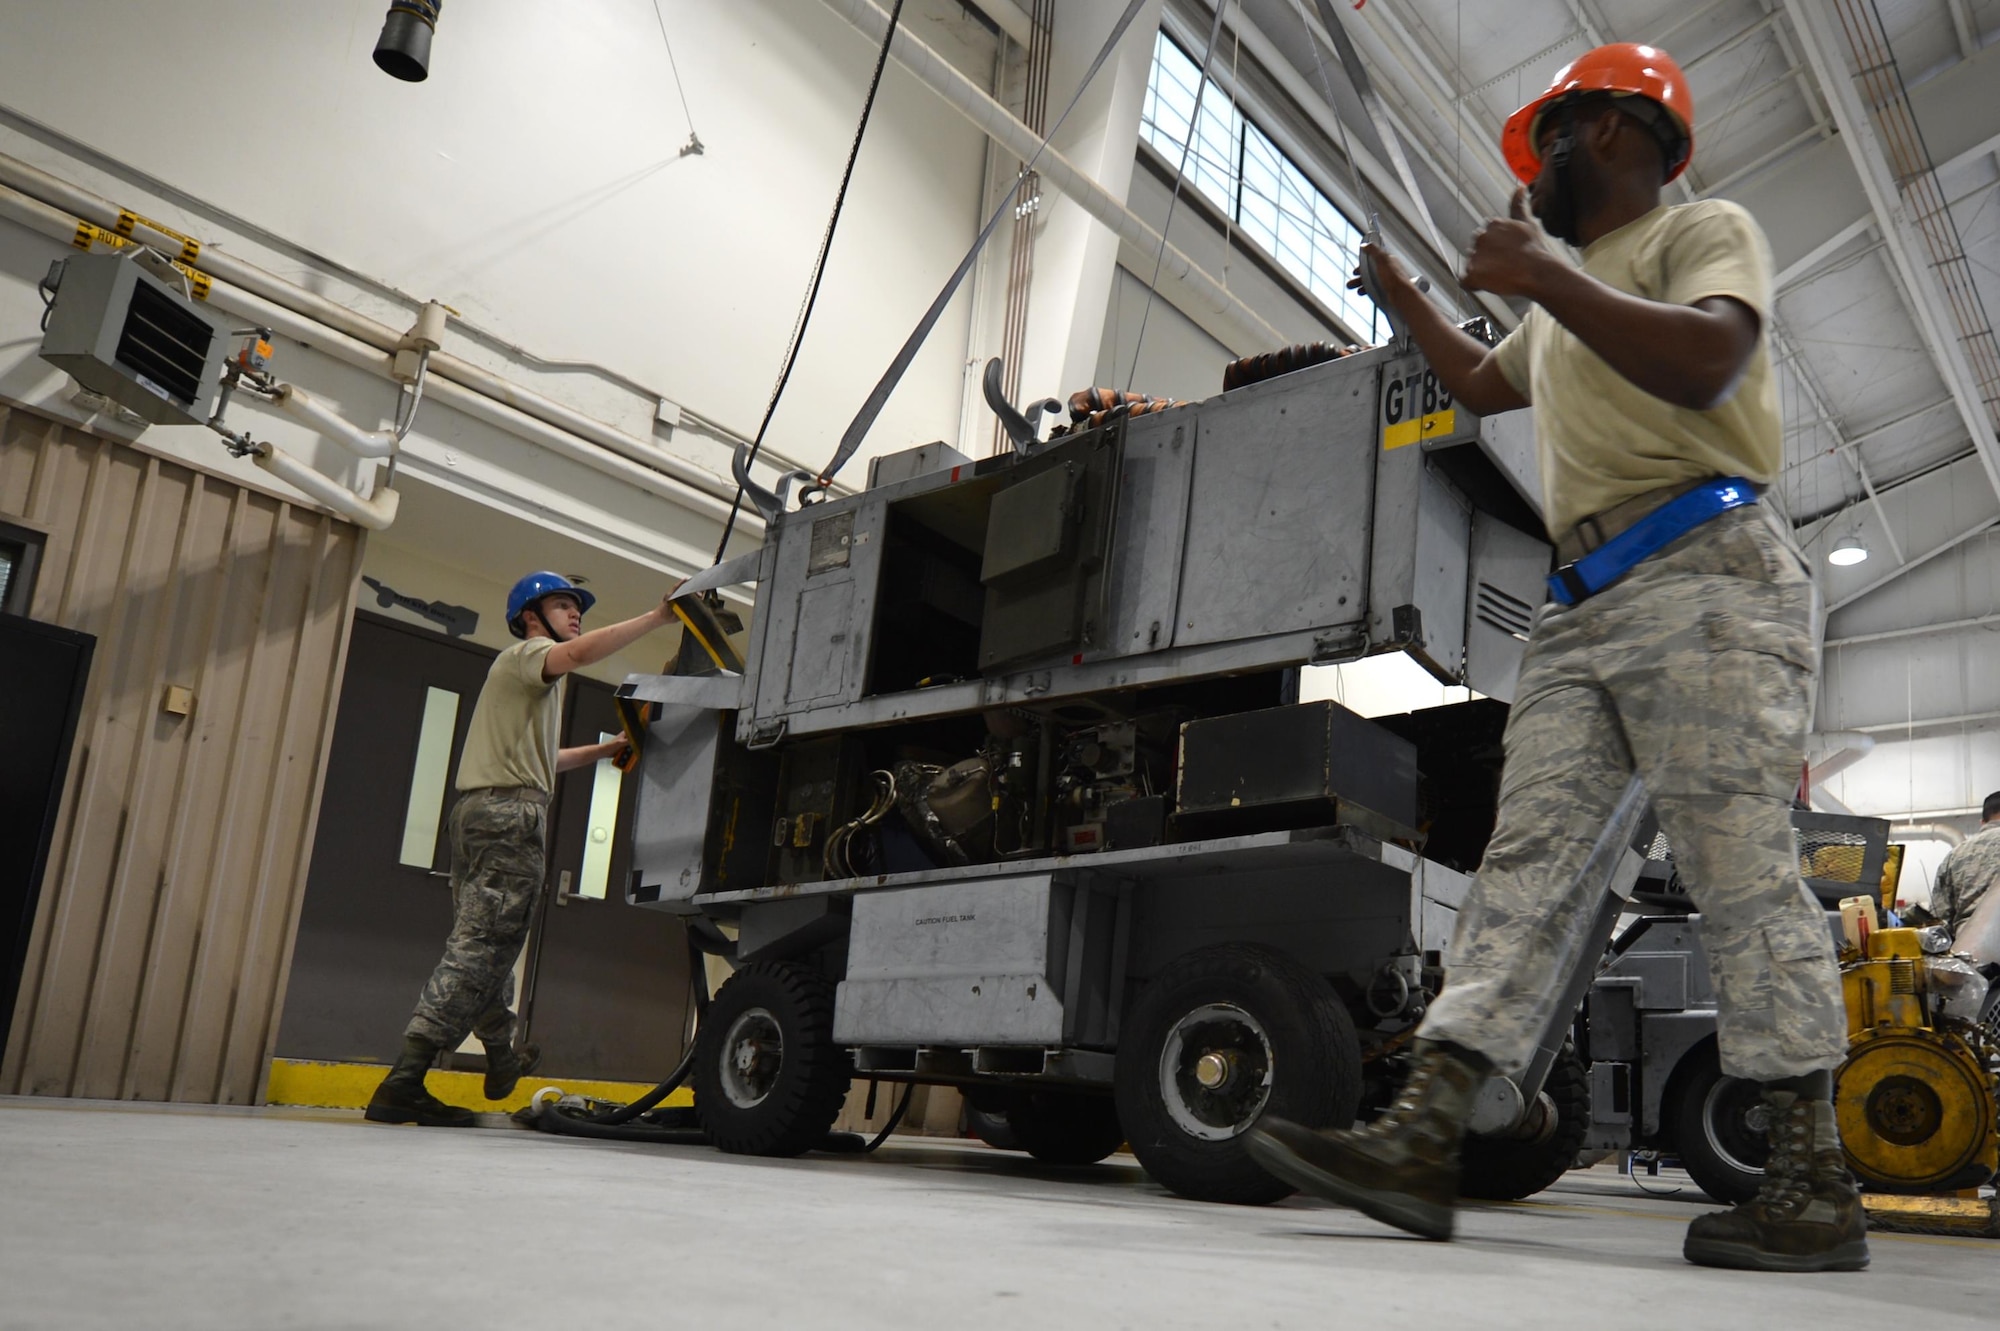 U.S. Airmen assigned to the 20th Equipment Maintenance Squadron aerospace ground equipment (AGE) flight use a lift to remove the top of an A/M32A-60 generator at Shaw Air Force Base, S.C., May 24, 2017. Airmen assigned to the AGE flight utilize an array of tools and machinery to perform repairs on any and all aircraft maintenance equipment that enters the work center. (U.S. Air Force photo by Airman 1st Class Christopher Maldonado)